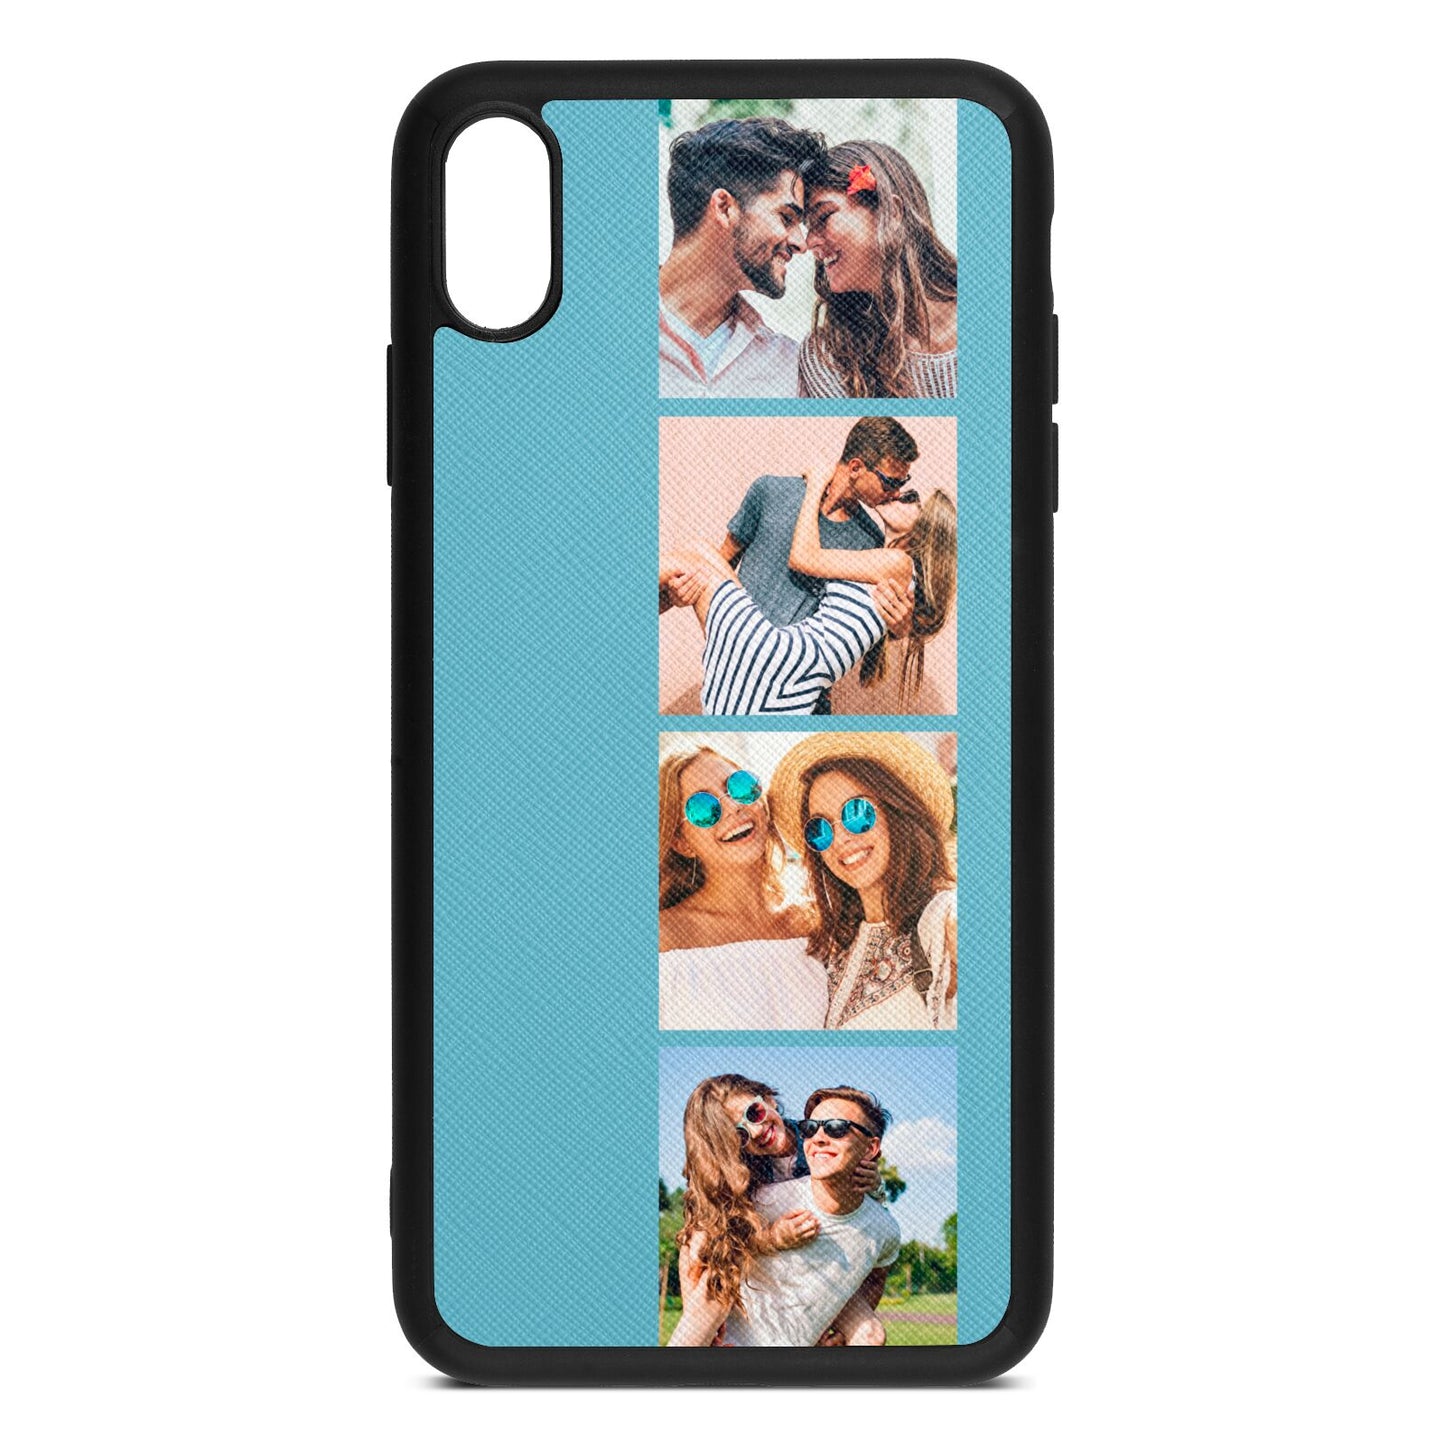 Photo Strip Montage Upload Sky Saffiano Leather iPhone Xs Max Case